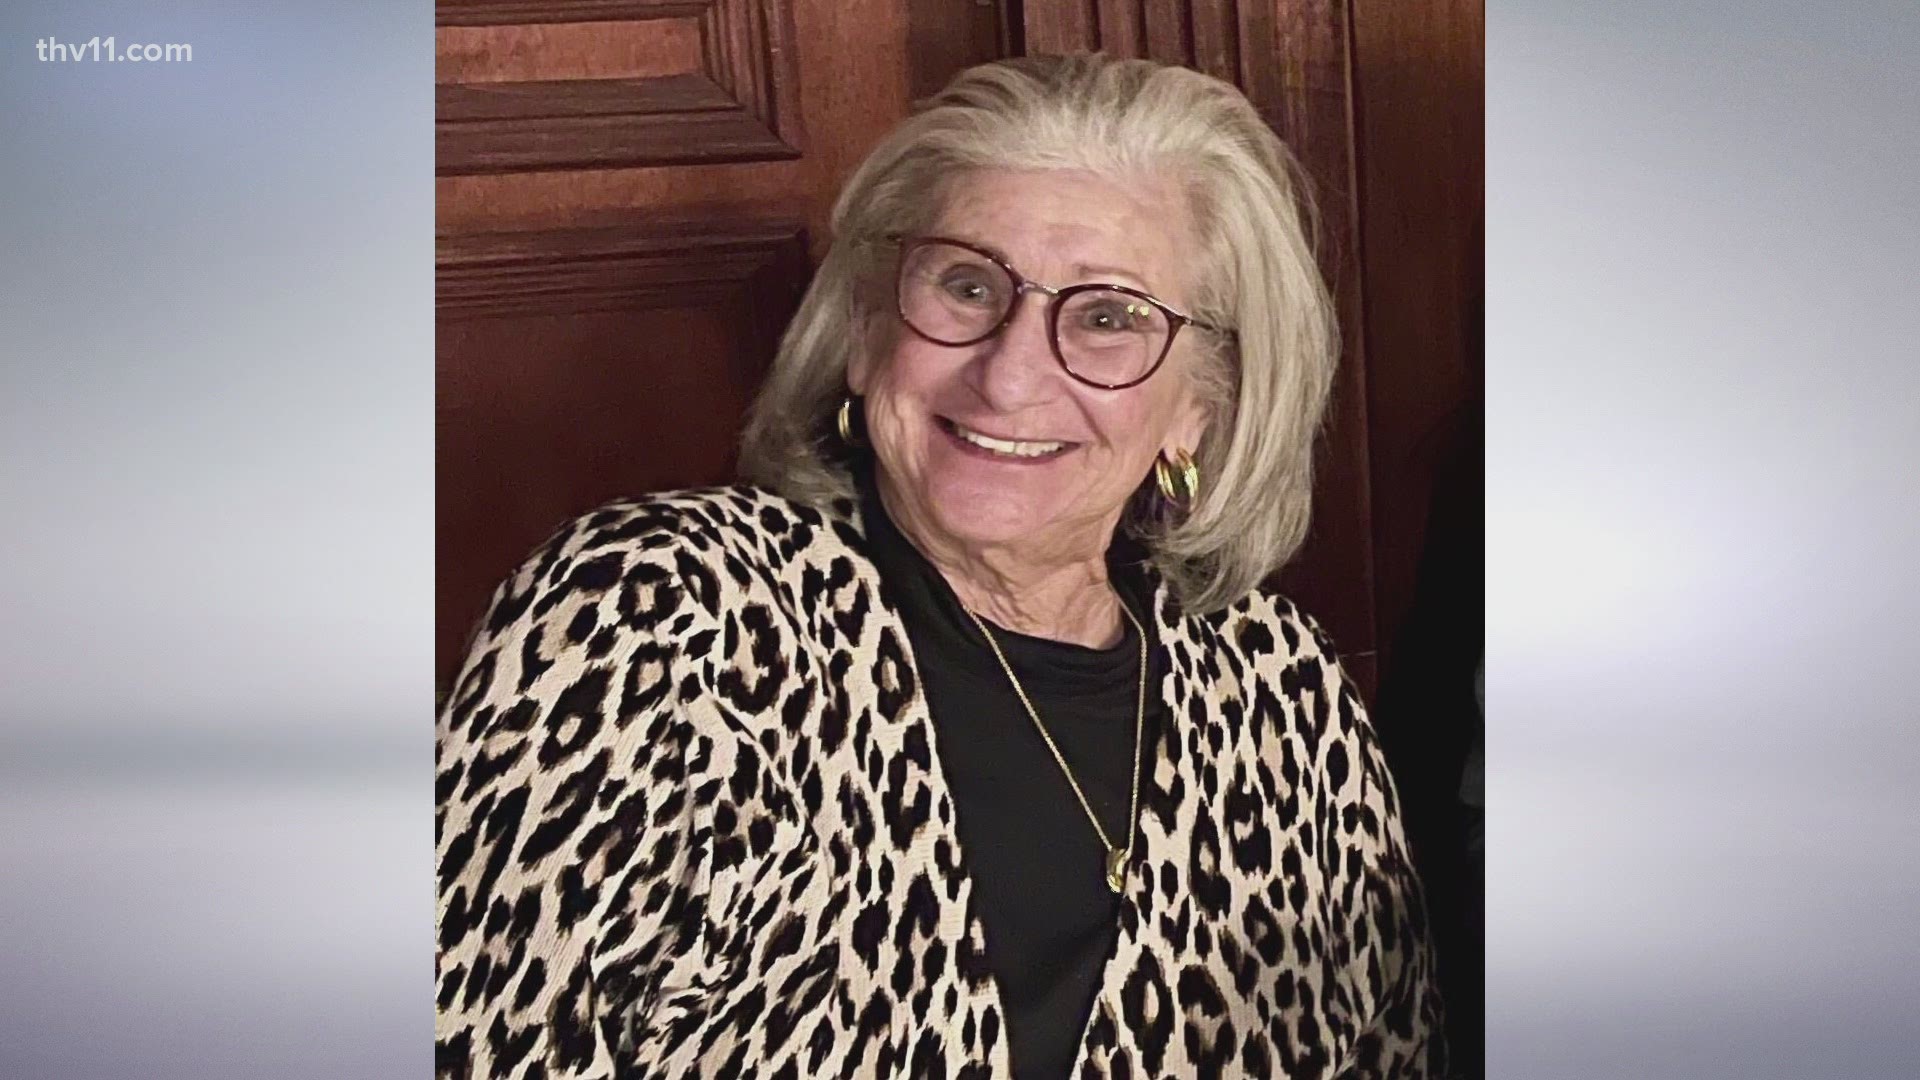 Judy Kohn-Tenenbaum was known by many in the central Arkansas community for her contributions to several non-profit organizations.